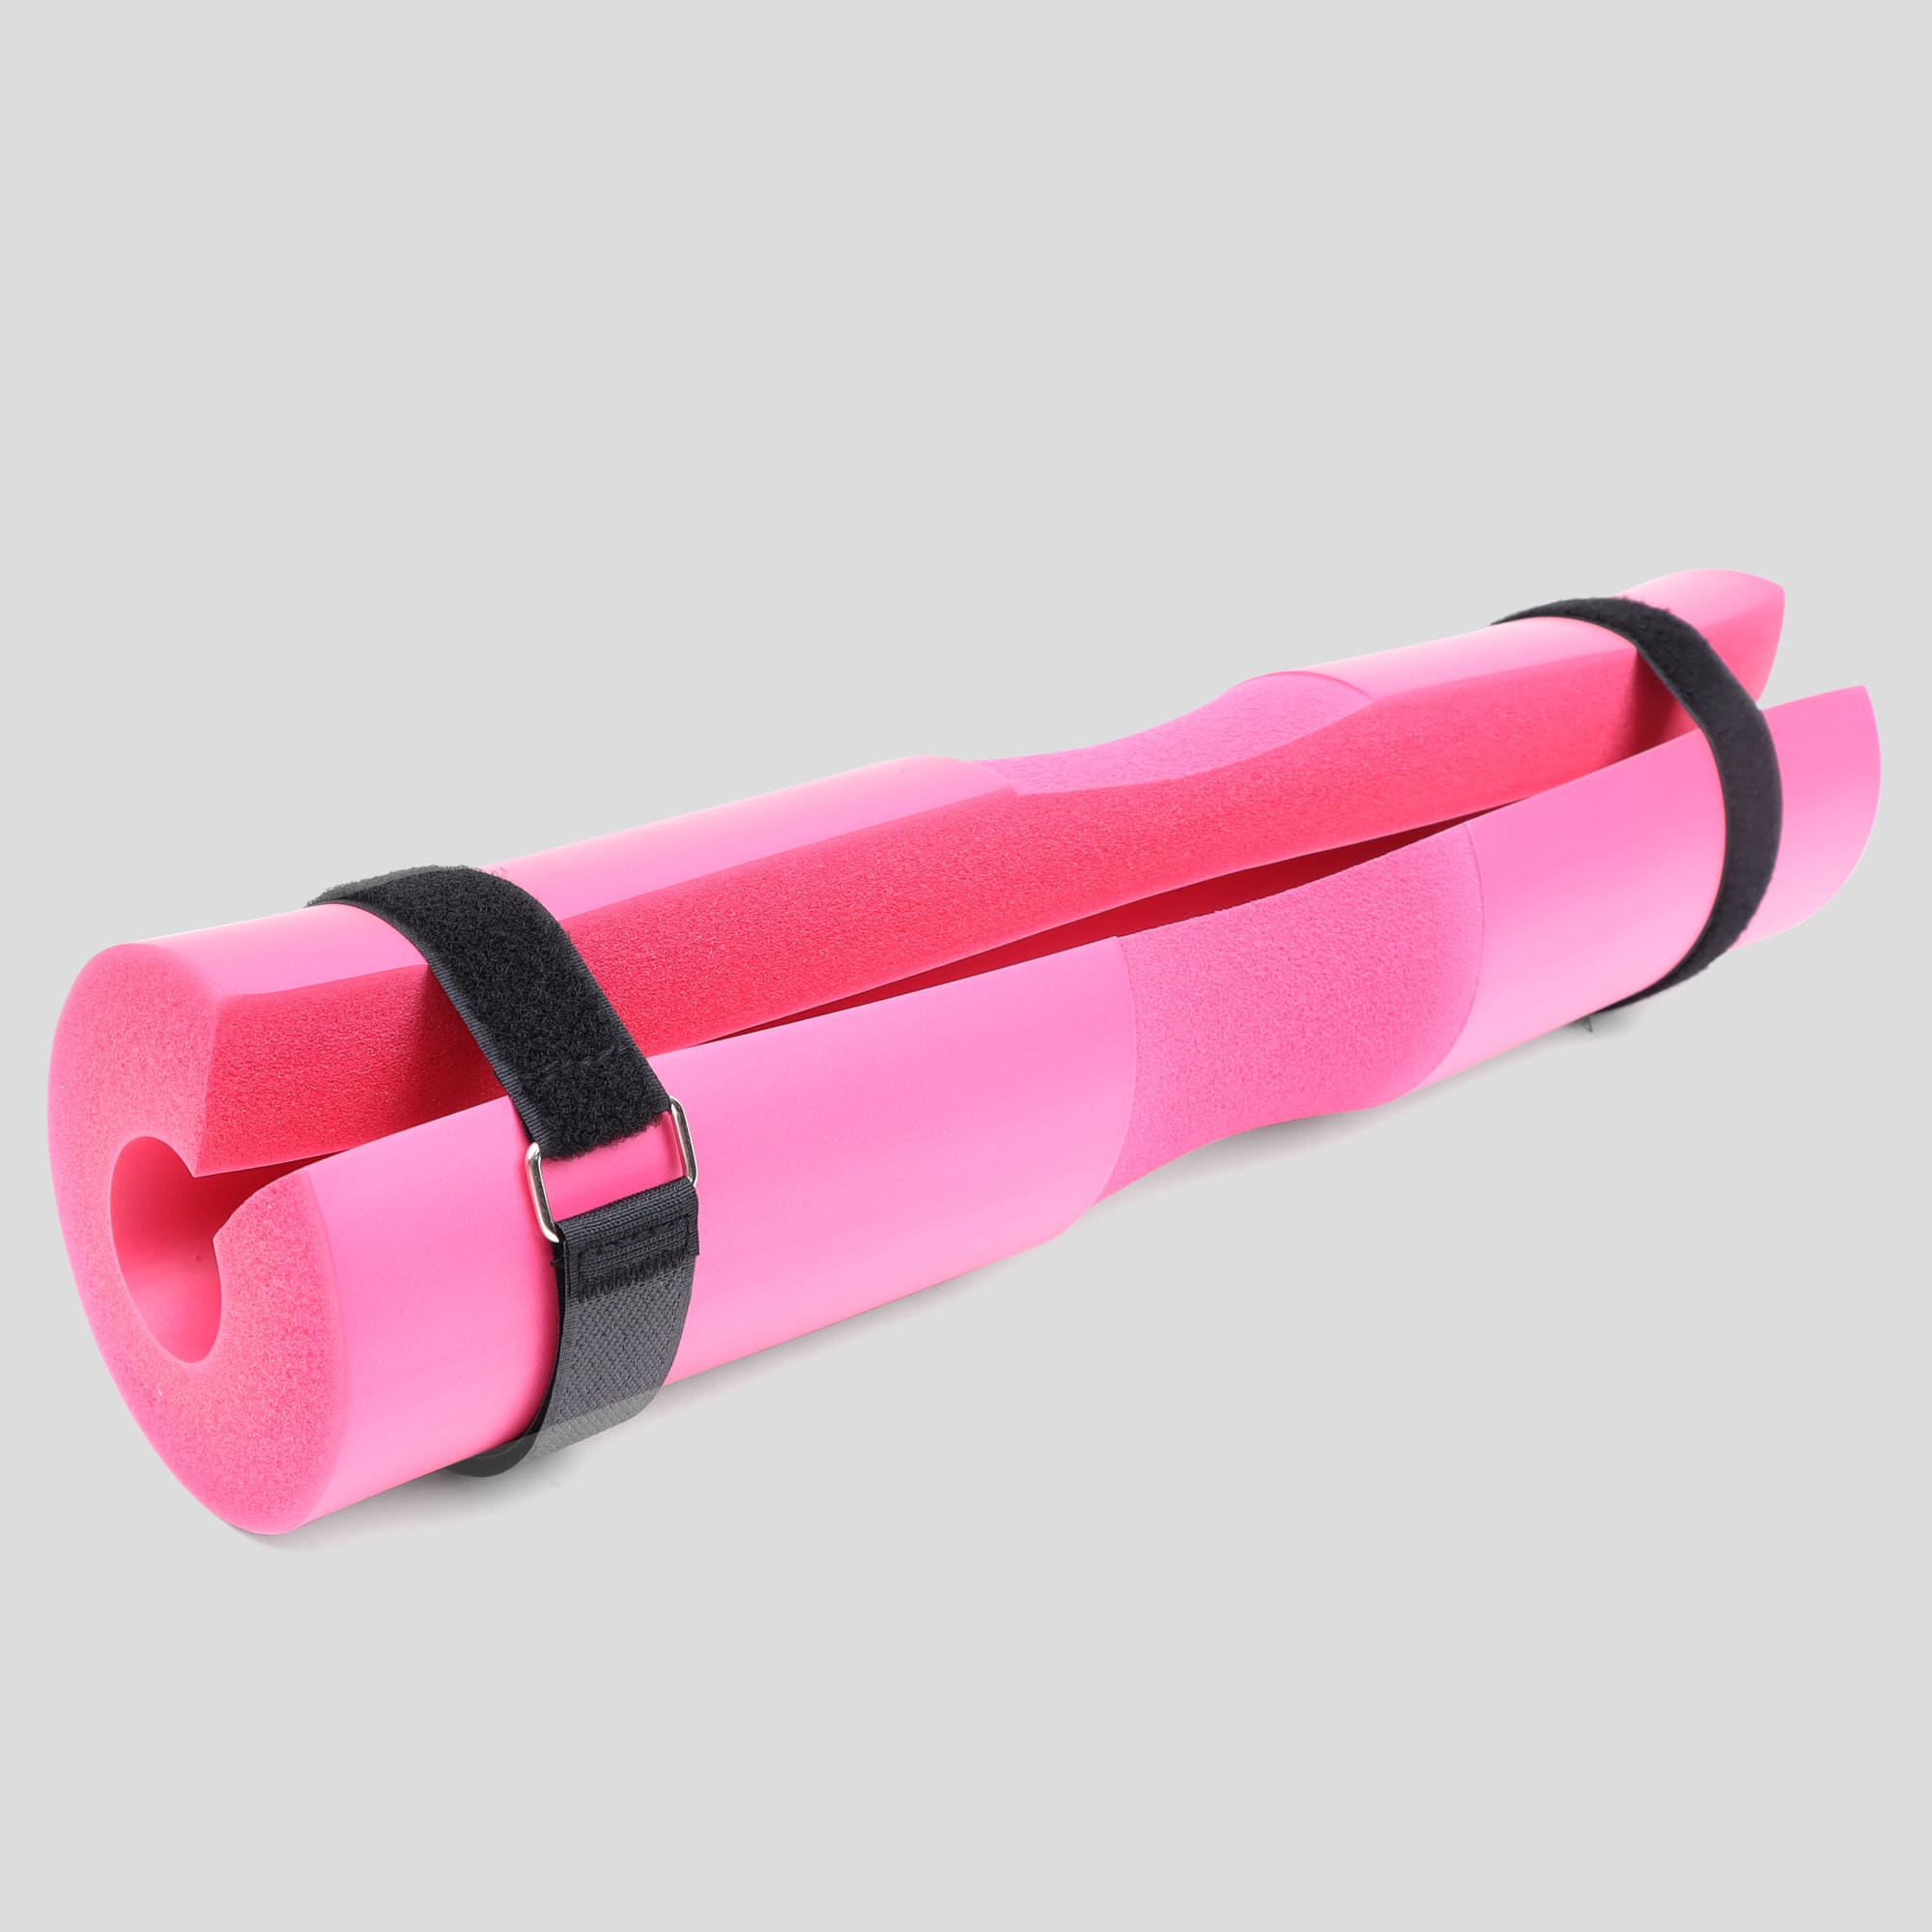 Barbell Pad - Pink